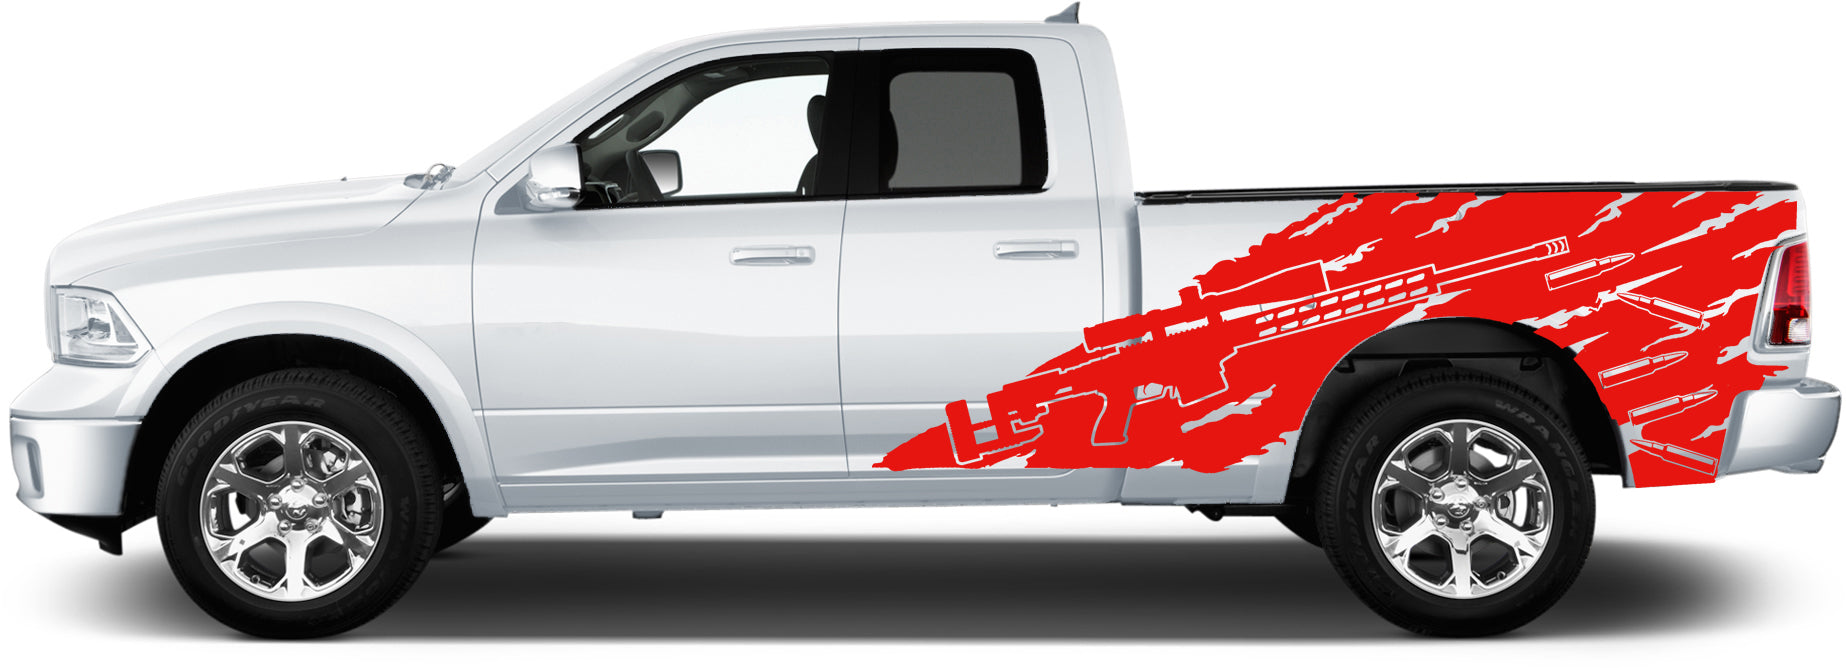 sniper side decal for dodge ram 2009 to 2018 models red